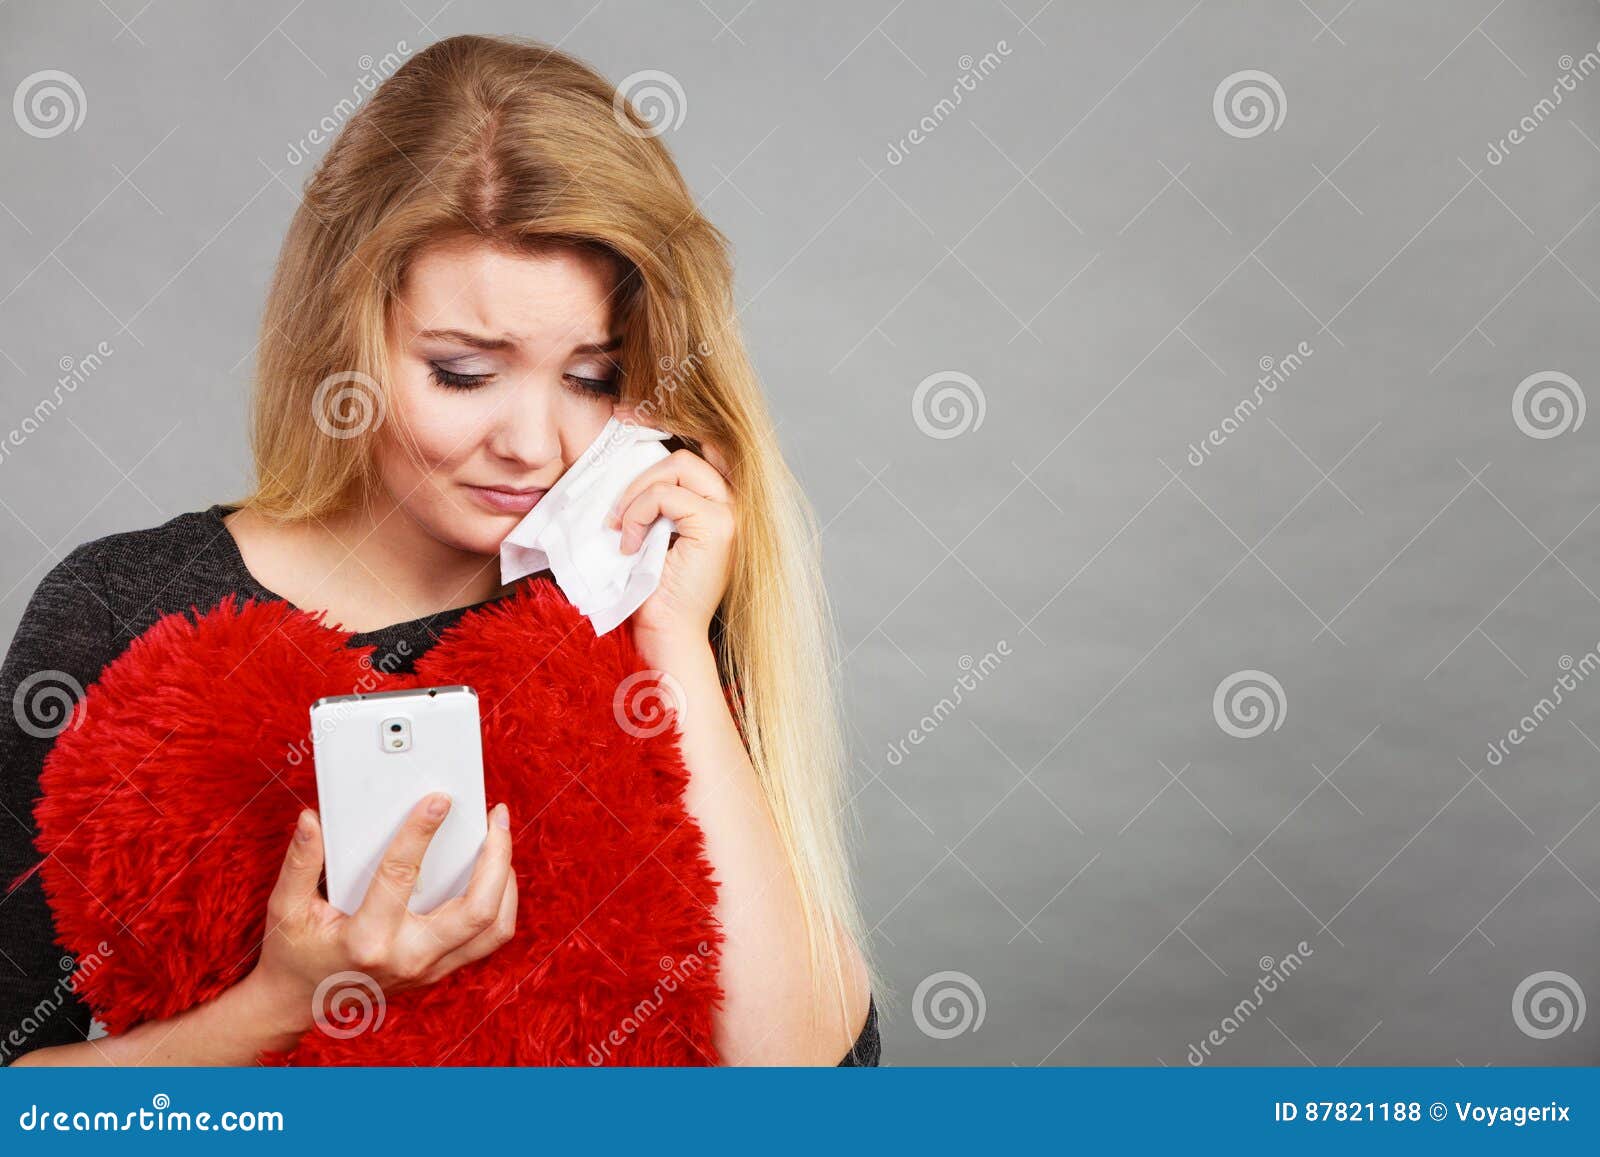 Sad Heartbroken Woman Looking at Her Phone Stock Photo - Image of ...